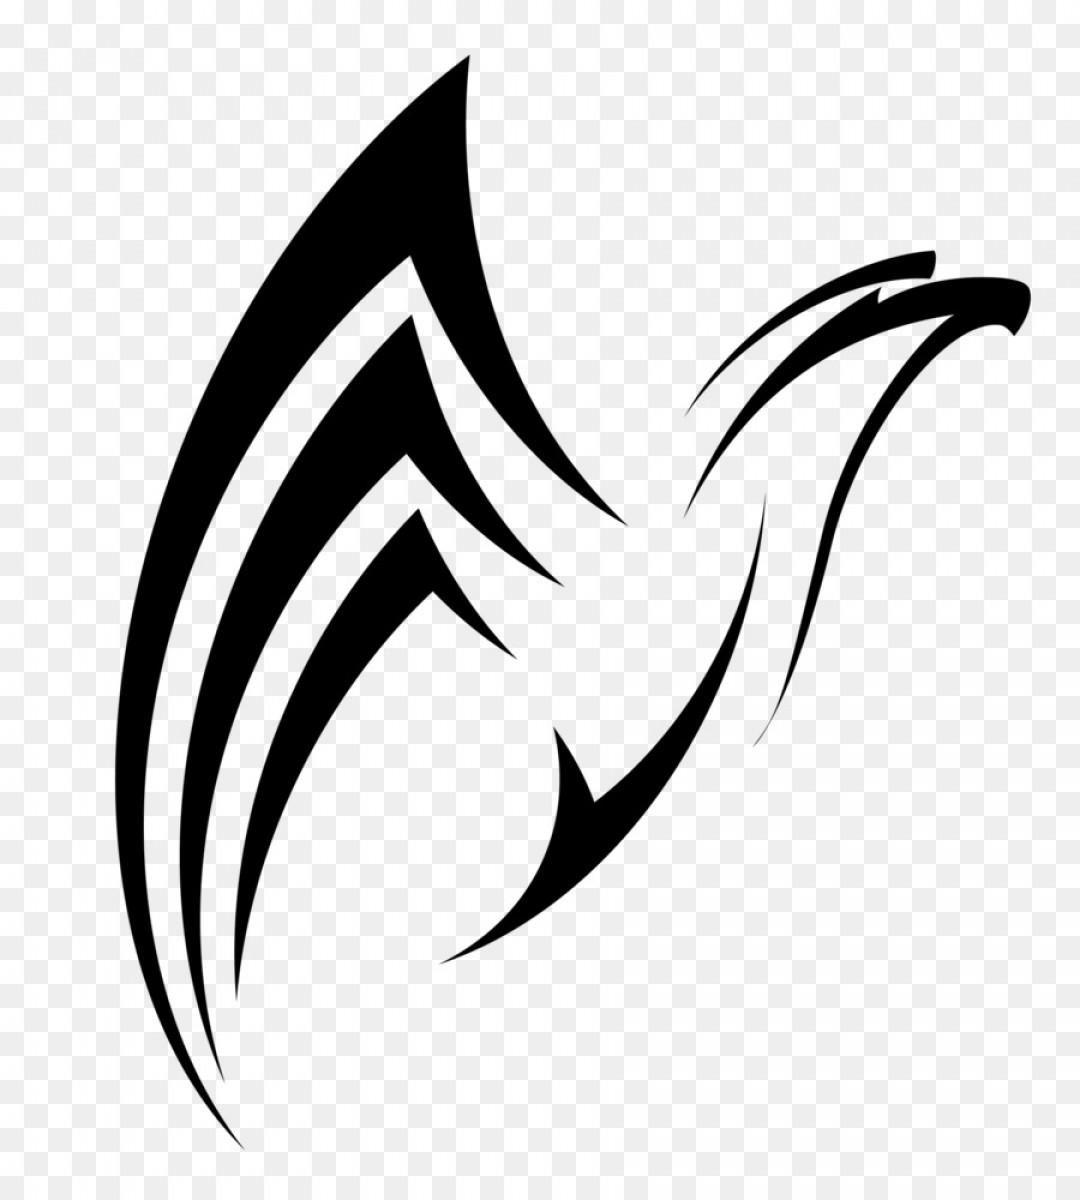 Black and White Seahawks Logo - Unique Black And White Seahawks Logo Vector Pictures » Free Vector ...